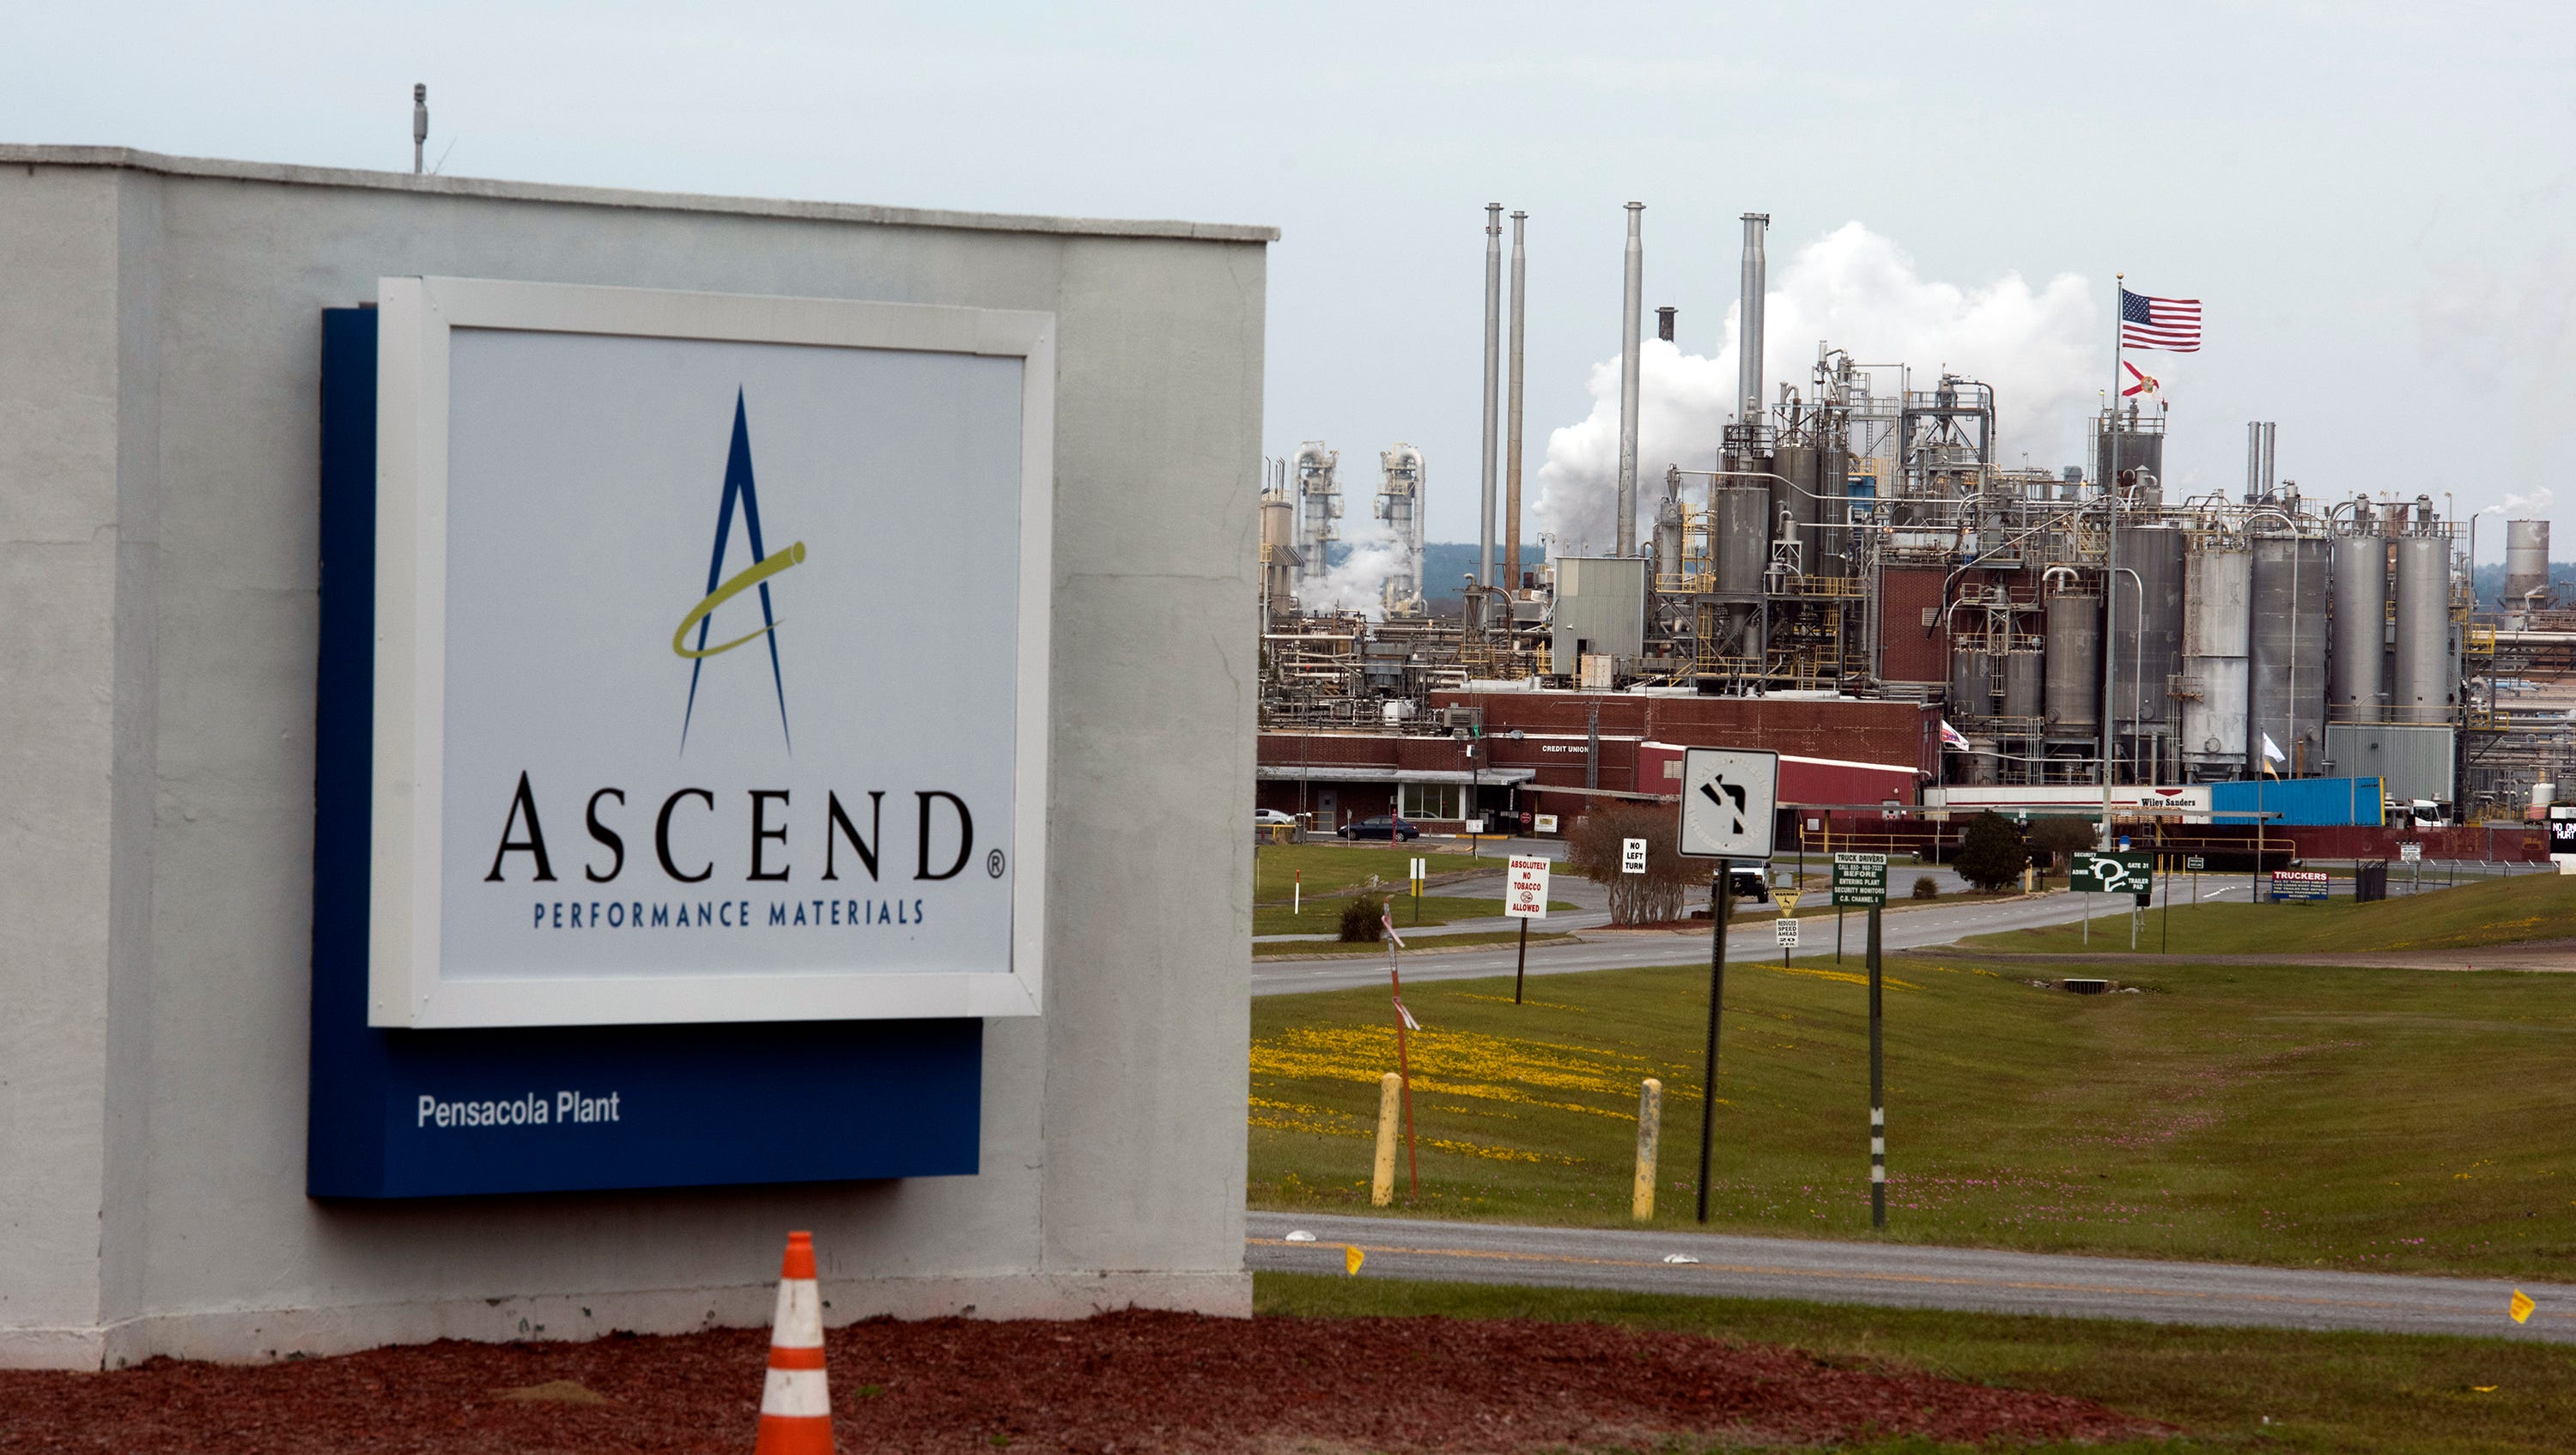 Fire put out at Ascend Materials early Tuesday morning